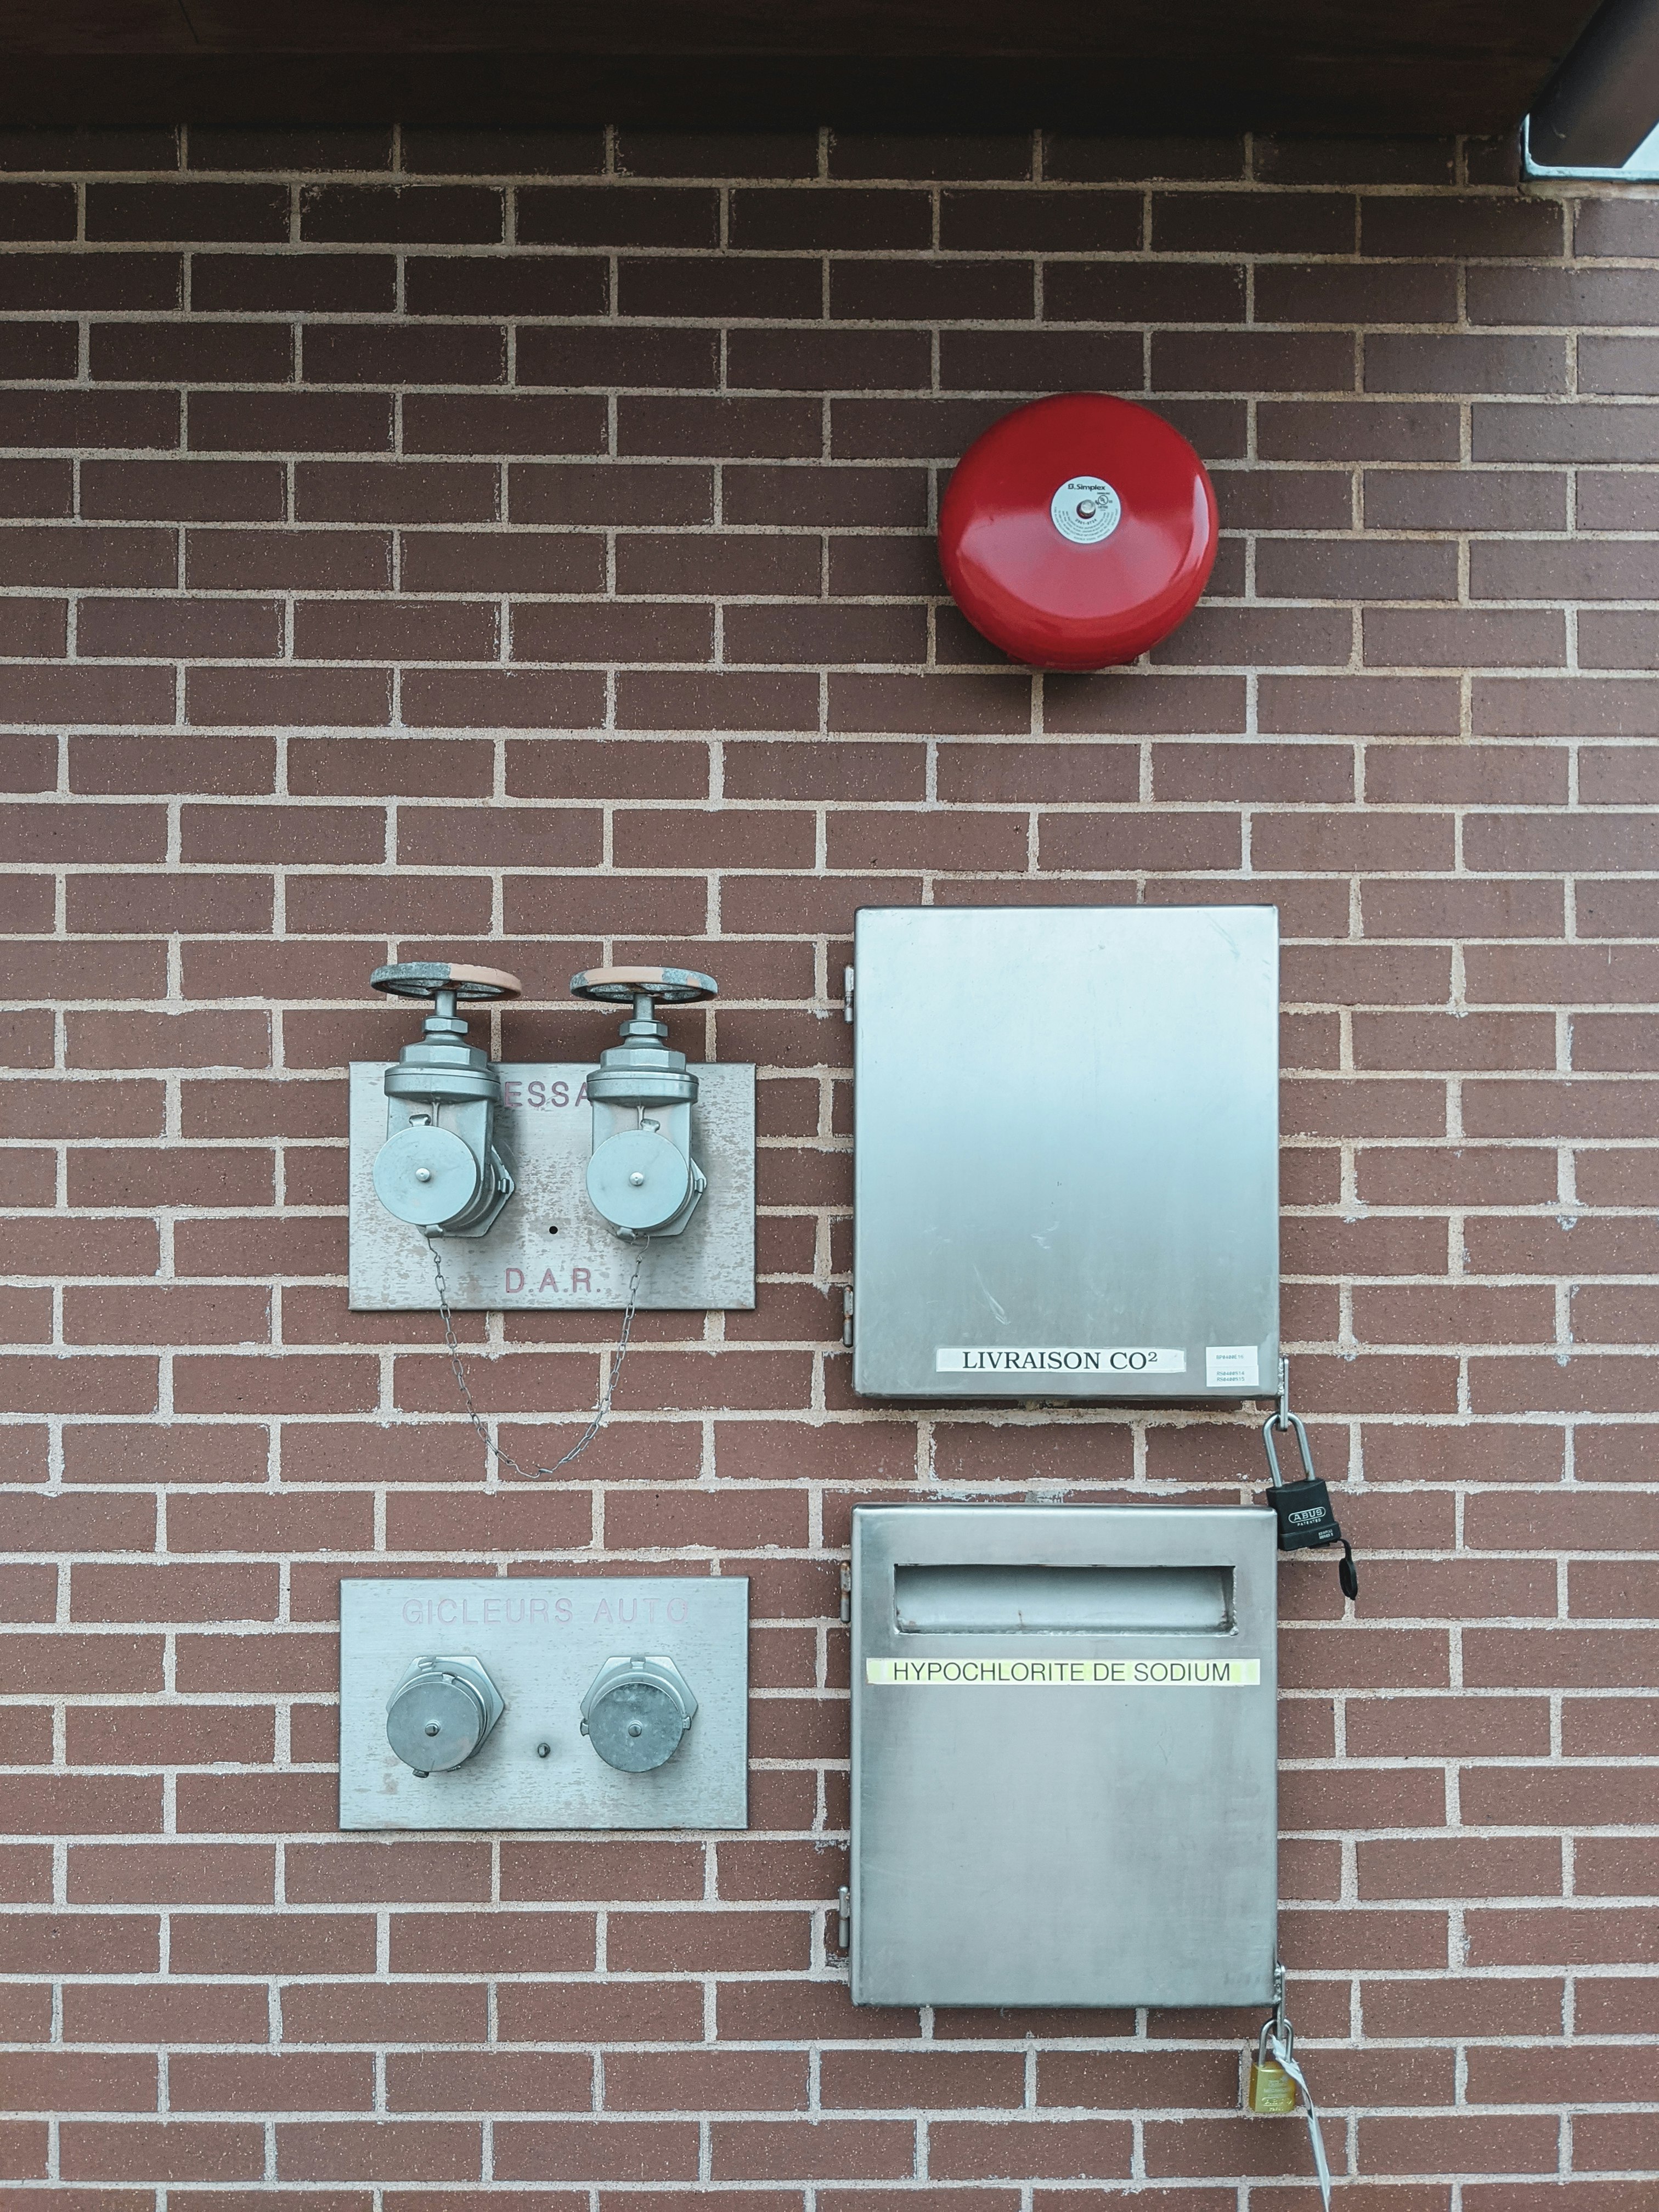 red round wall mounted device